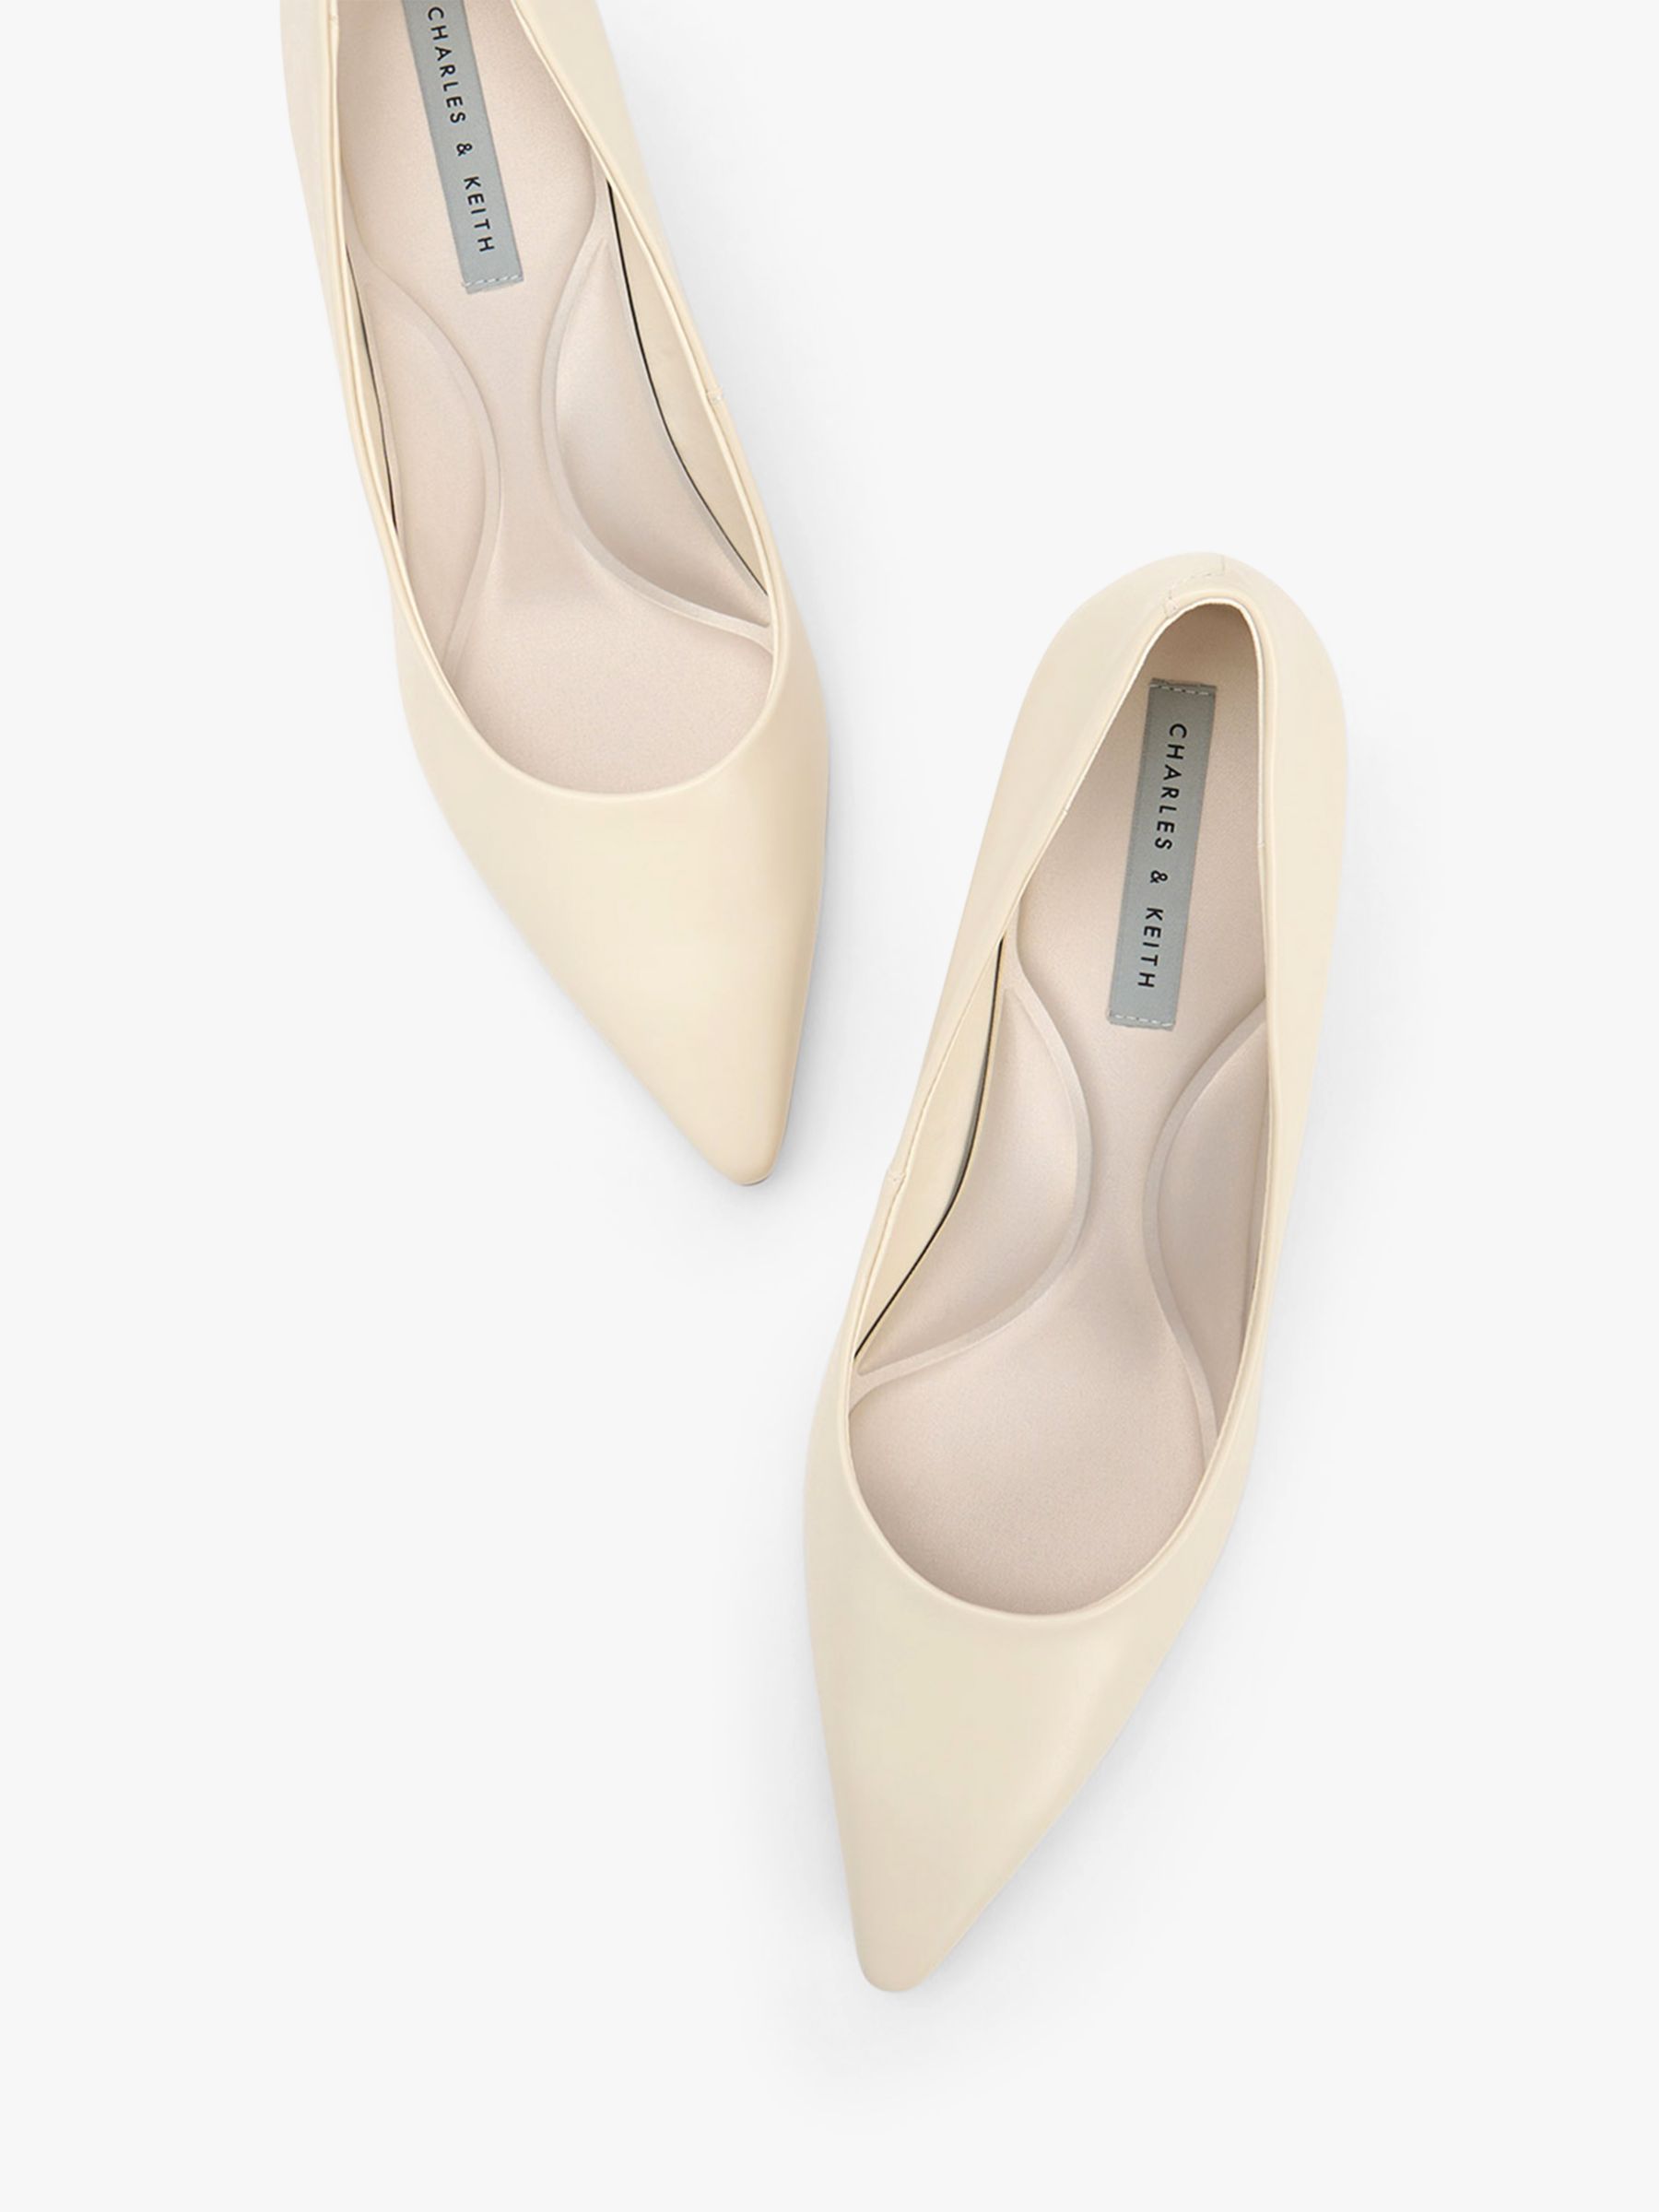 CHARLES & KEITH Emmy Kitten Heeled Court Shoes, Cream at John Lewis ...